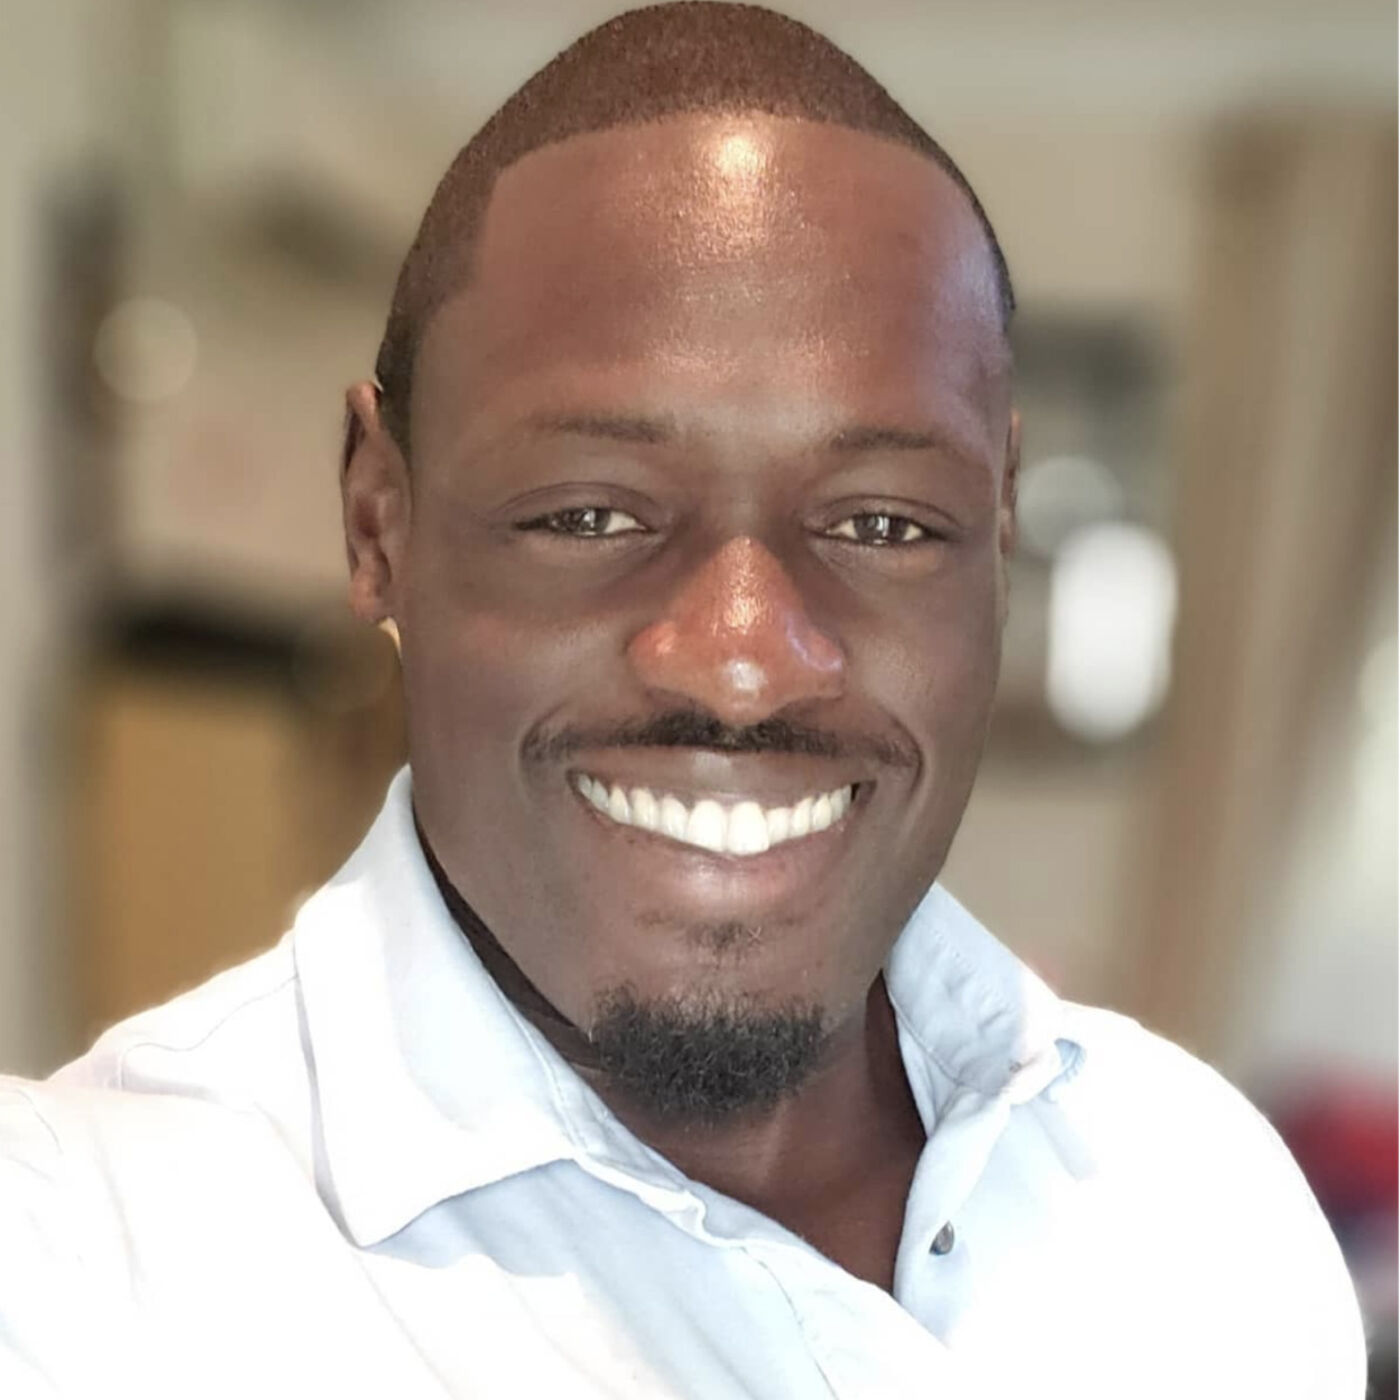 Part 1 - The Power of Faith and Action: How Clifton Mbanugo Built a Thriving Web Design Business